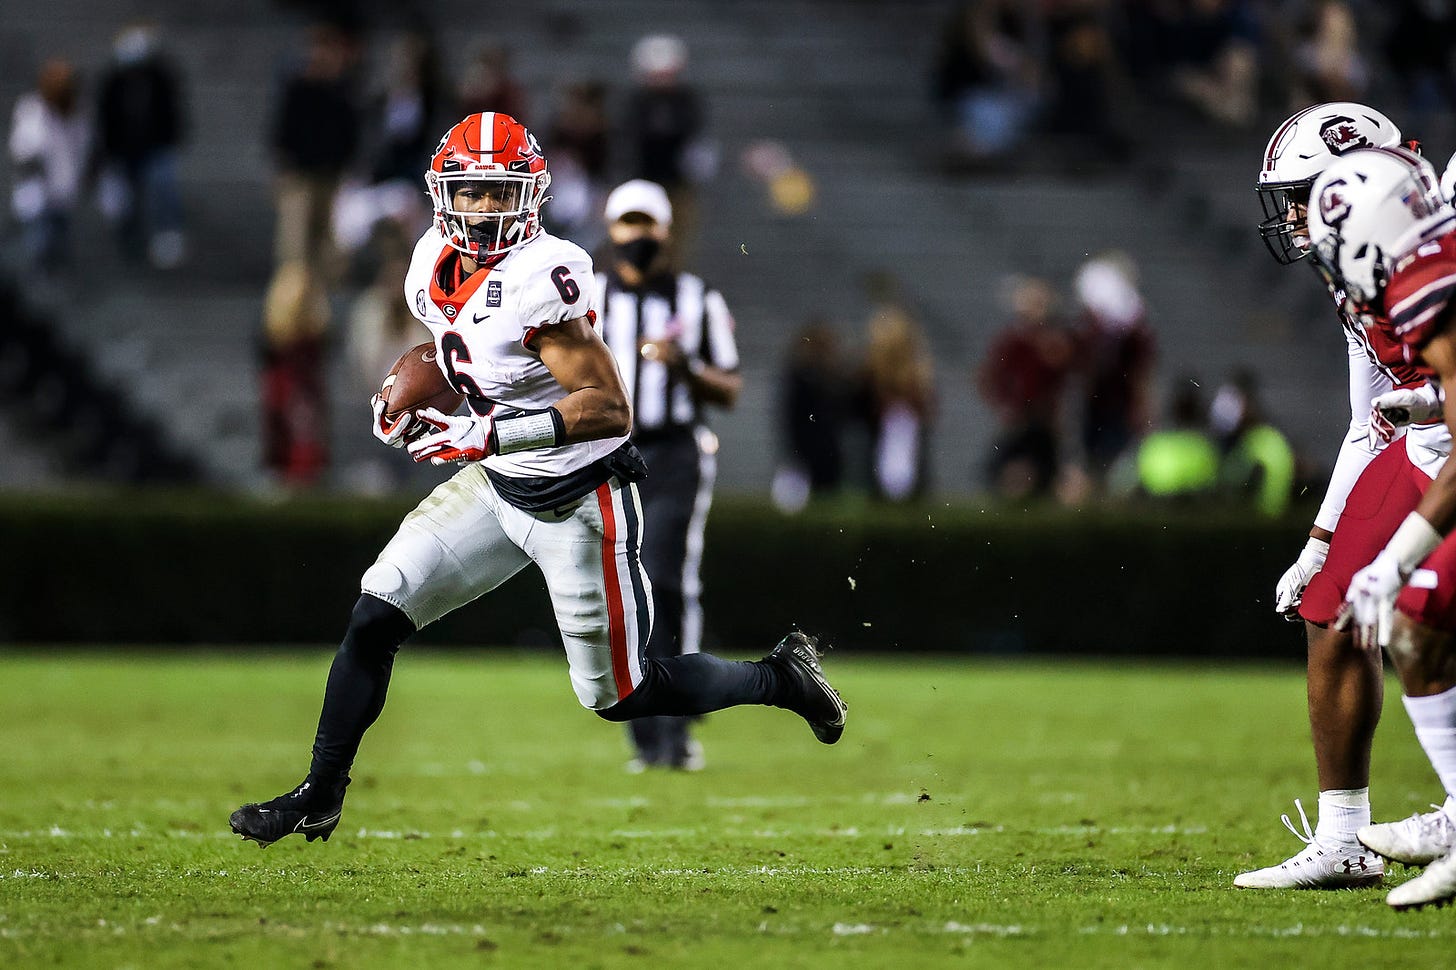 Georgia running back Kenny McIntosh (6) during a game against South Carolina at Williams-Brice Stadium in Columbia, SC., on Saturday, Nov. 28, 2020. (Photo by Tony Walsh)